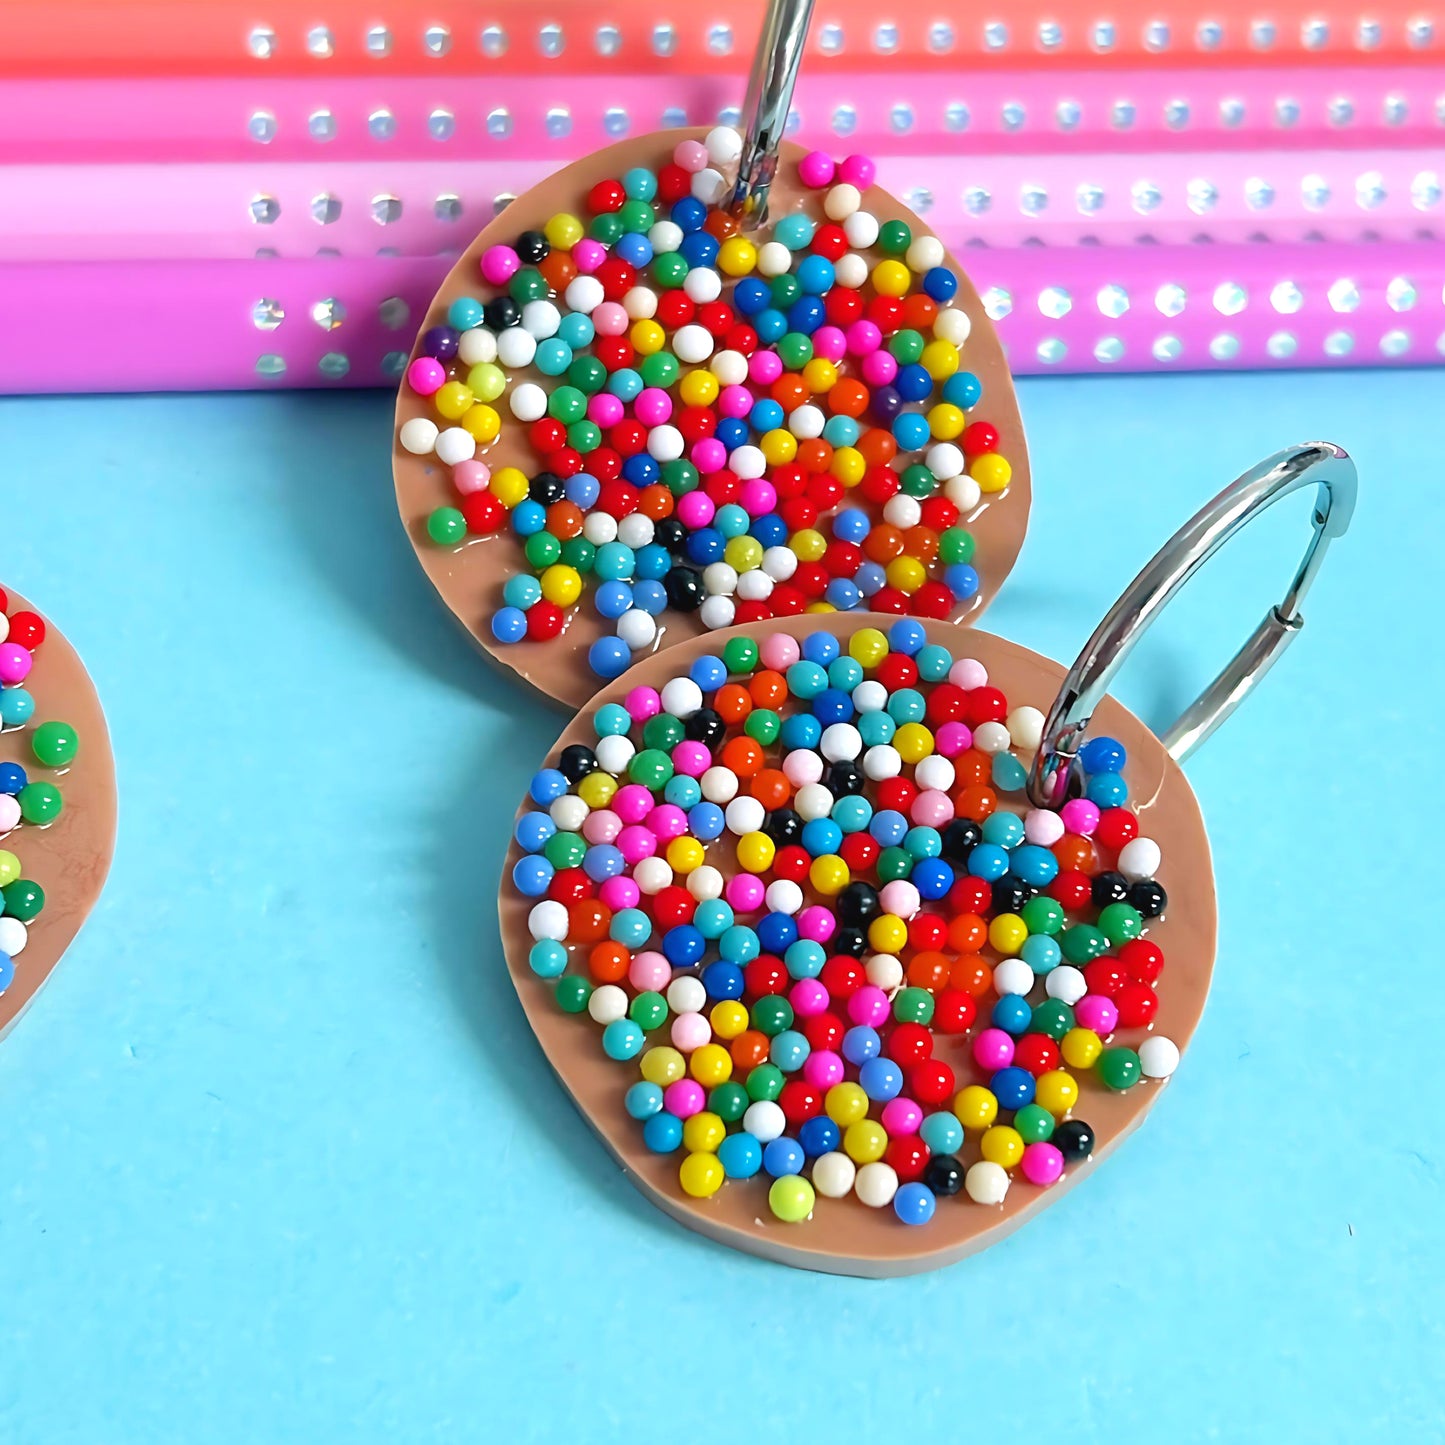 HELLO LITTLE 100 & 1000s coated chocolate treats : Choose your style : Handmade Resin